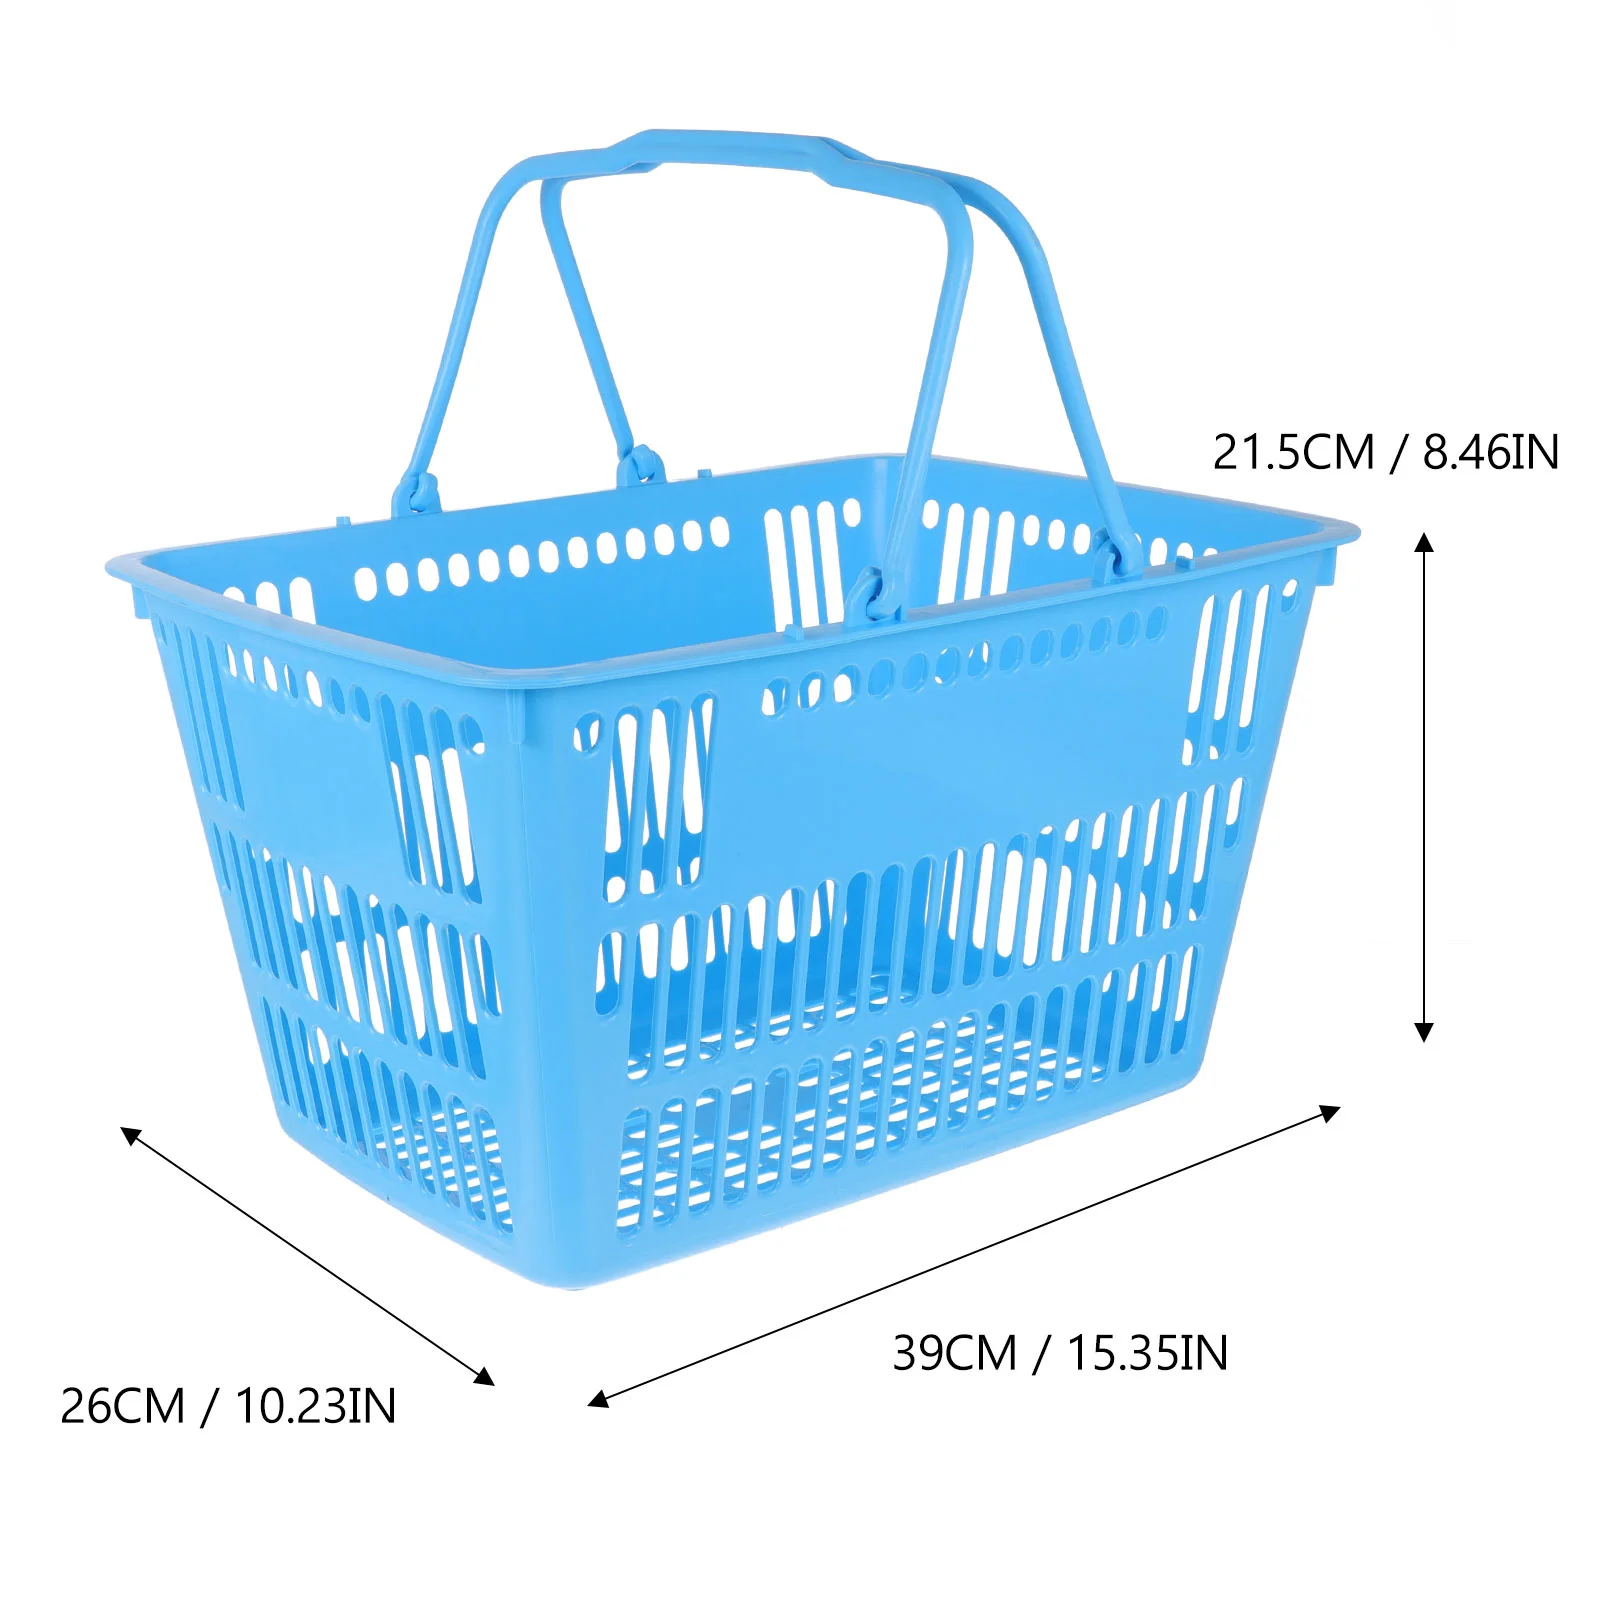 Basket Handles Shopping Cart Baskets Portable Plastic Food Crates Storage Shelf Organizing Grocery Carts Groceries Sundries